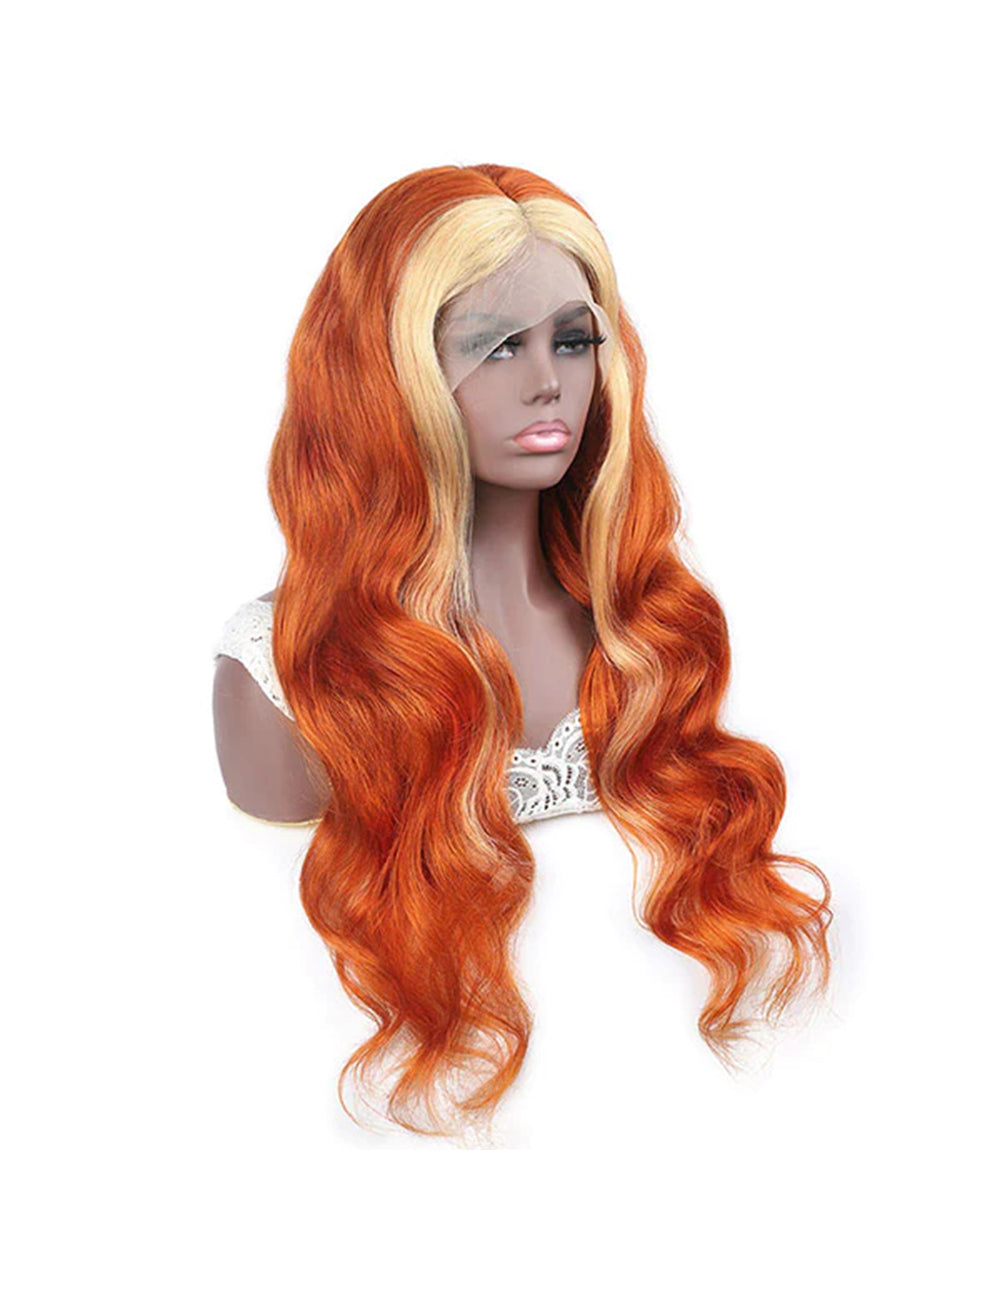 Ginger Blonde Wig 30 Inch Body Wave Human Hair Wig With Natural Hairline Lace Front Wig